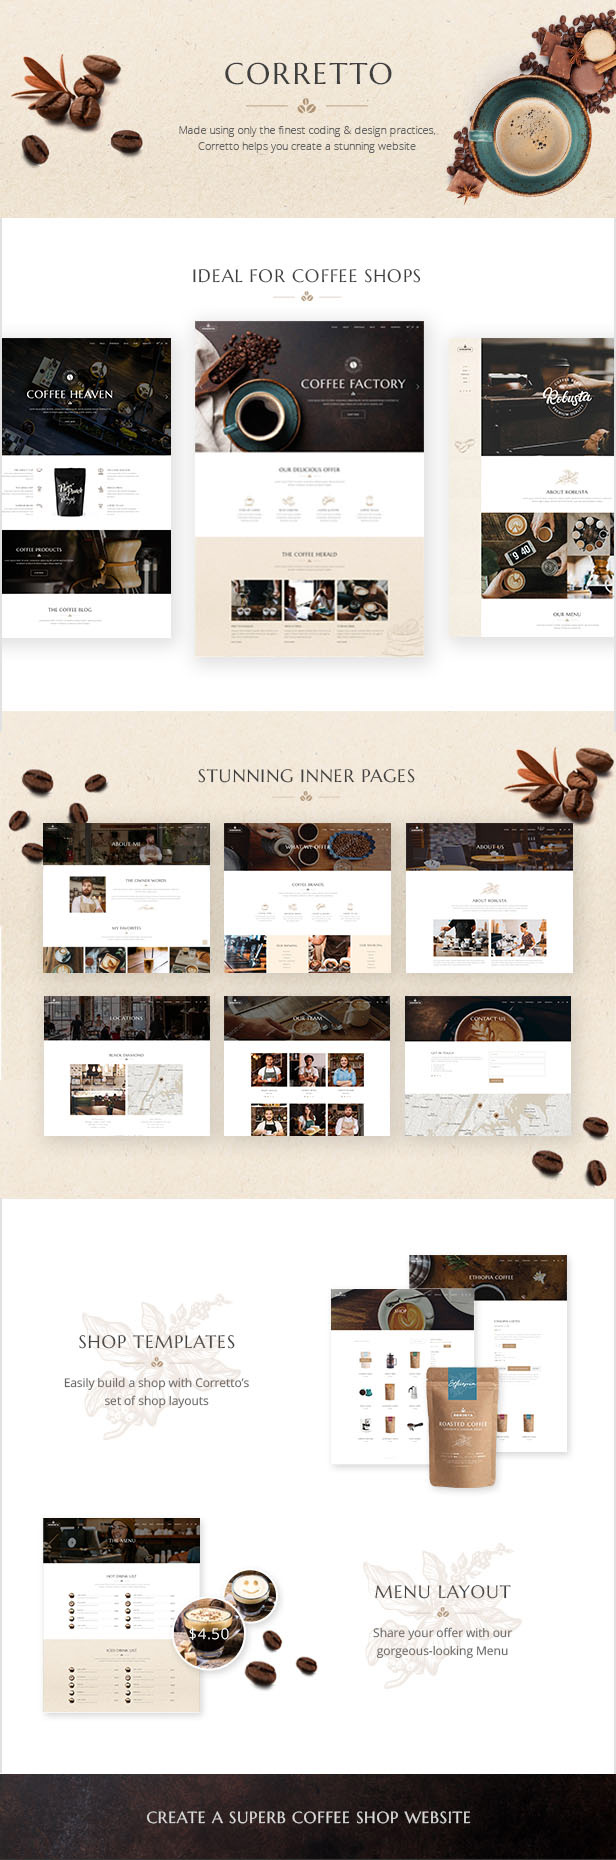 WordPress theme Corretto - A Modern Theme for Coffee Shops and Cafés (Restaurants & Cafes)